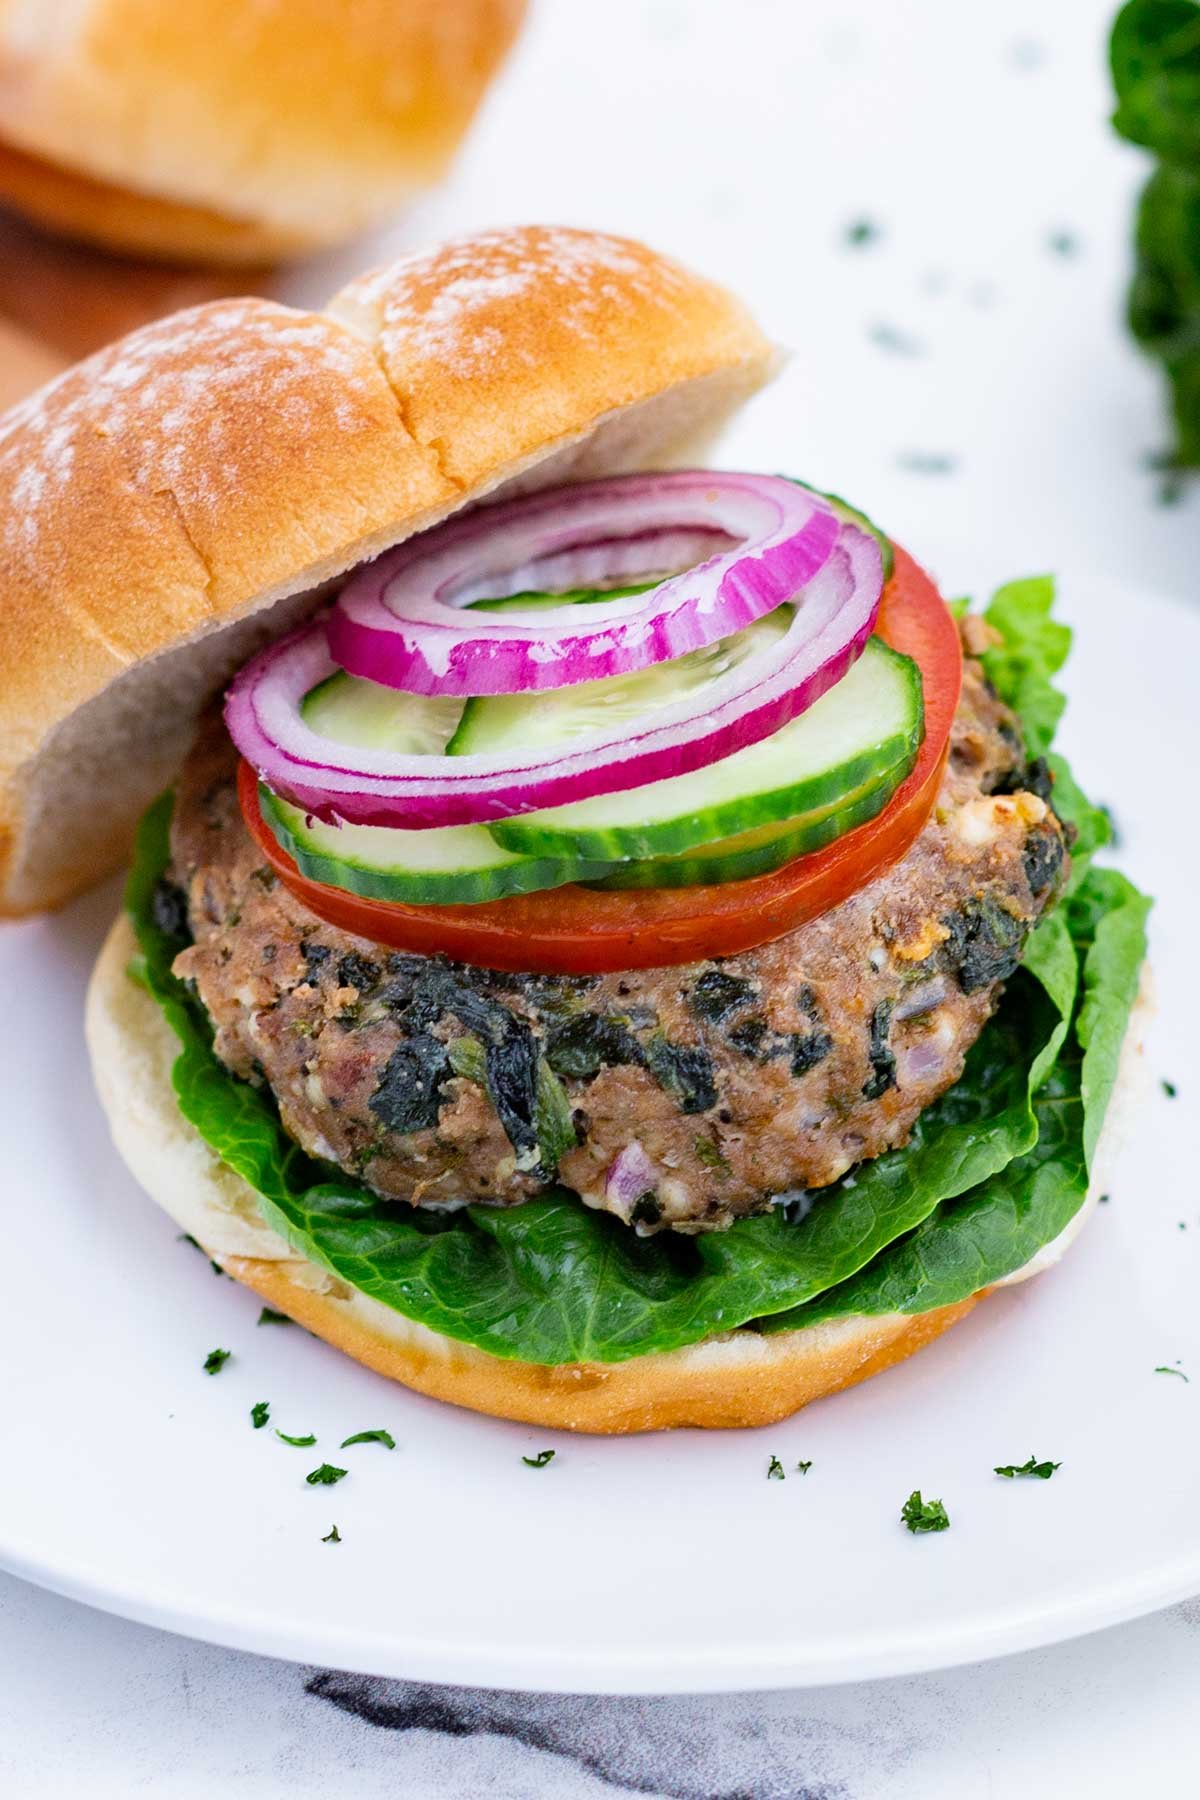 This burger is full of Mediterranean flavor and easy to cook at home on the stove.